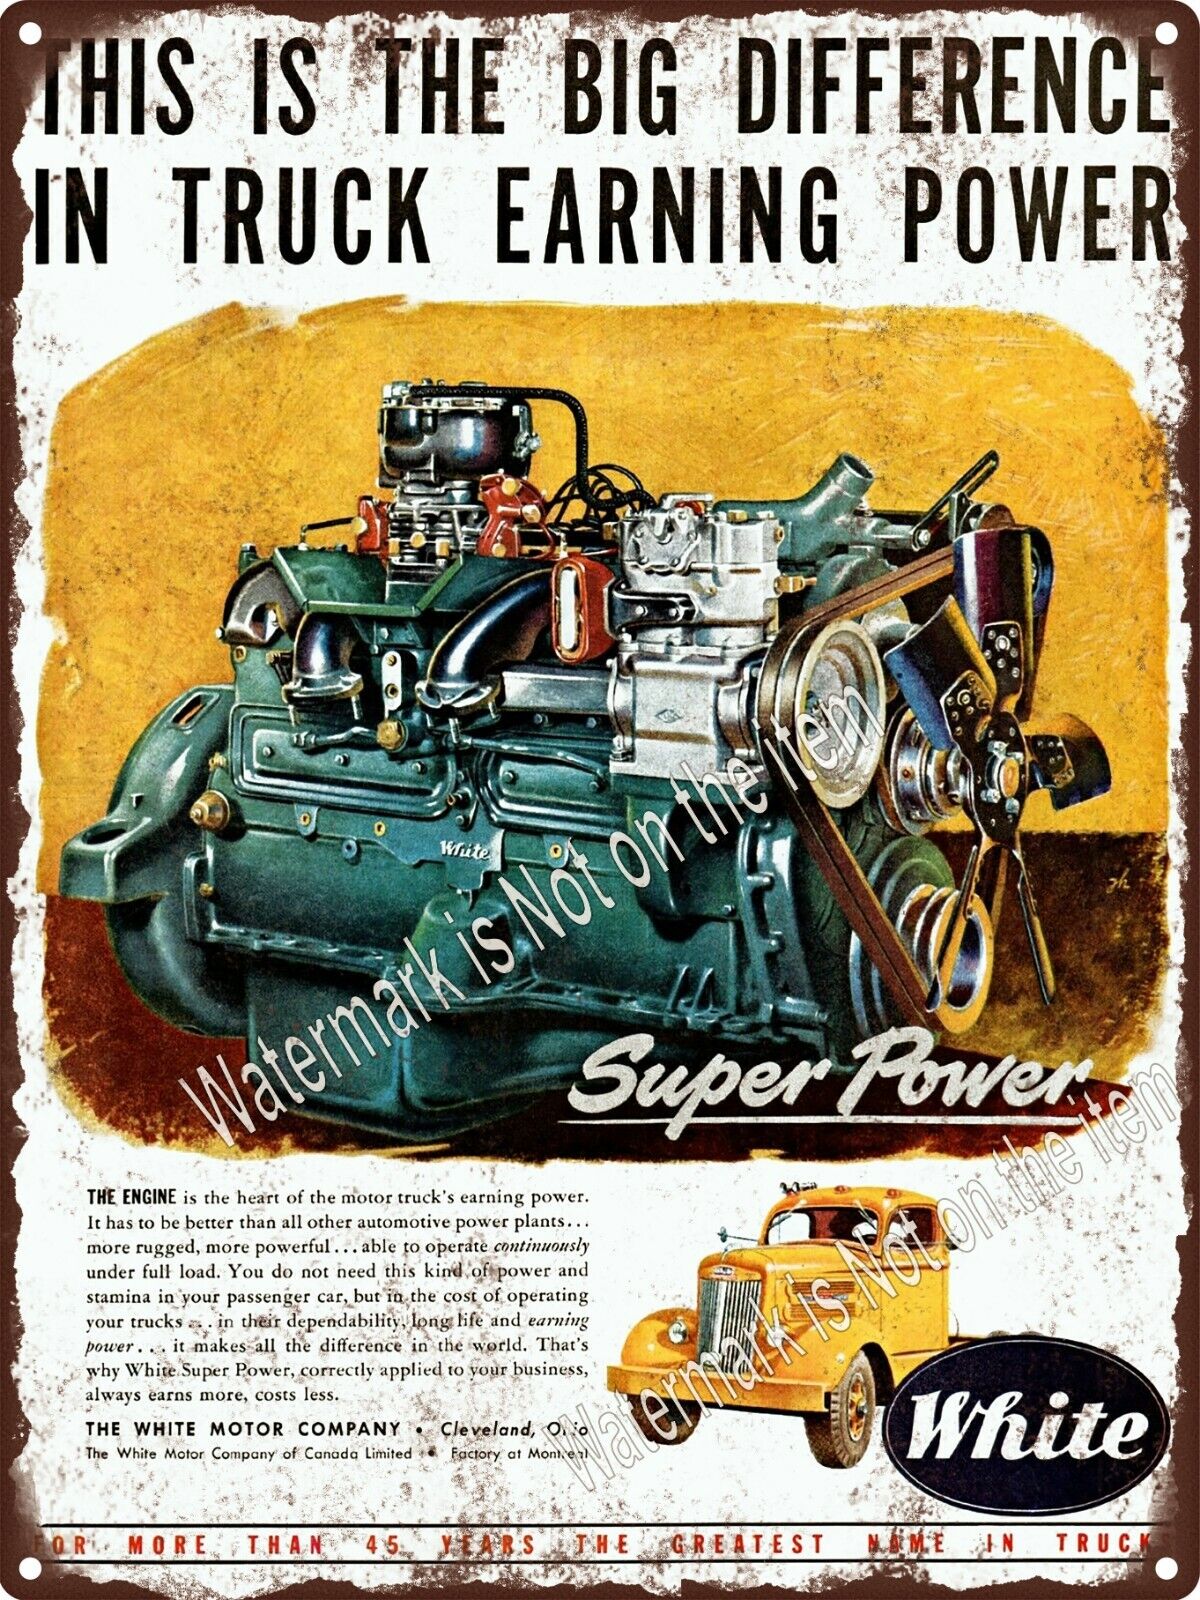 1949 White Truck ad with vintage illustration by John C Howard.